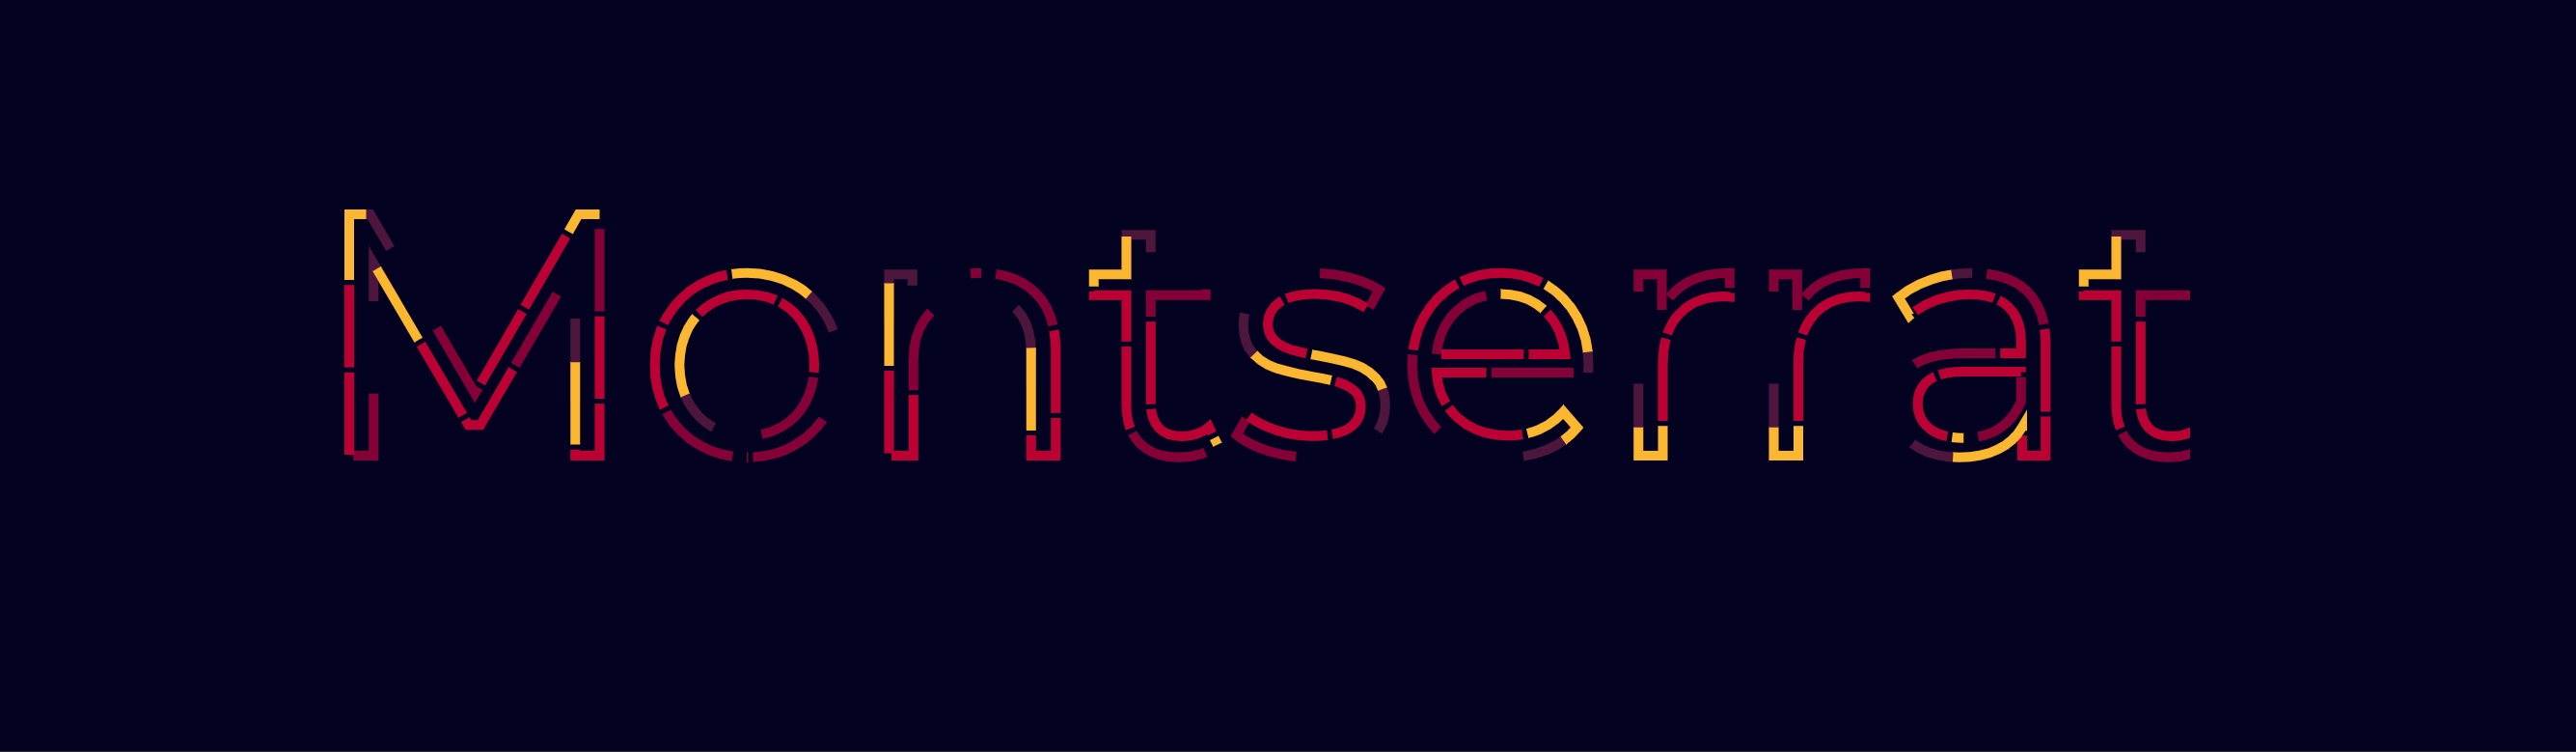 CSS Text Animation